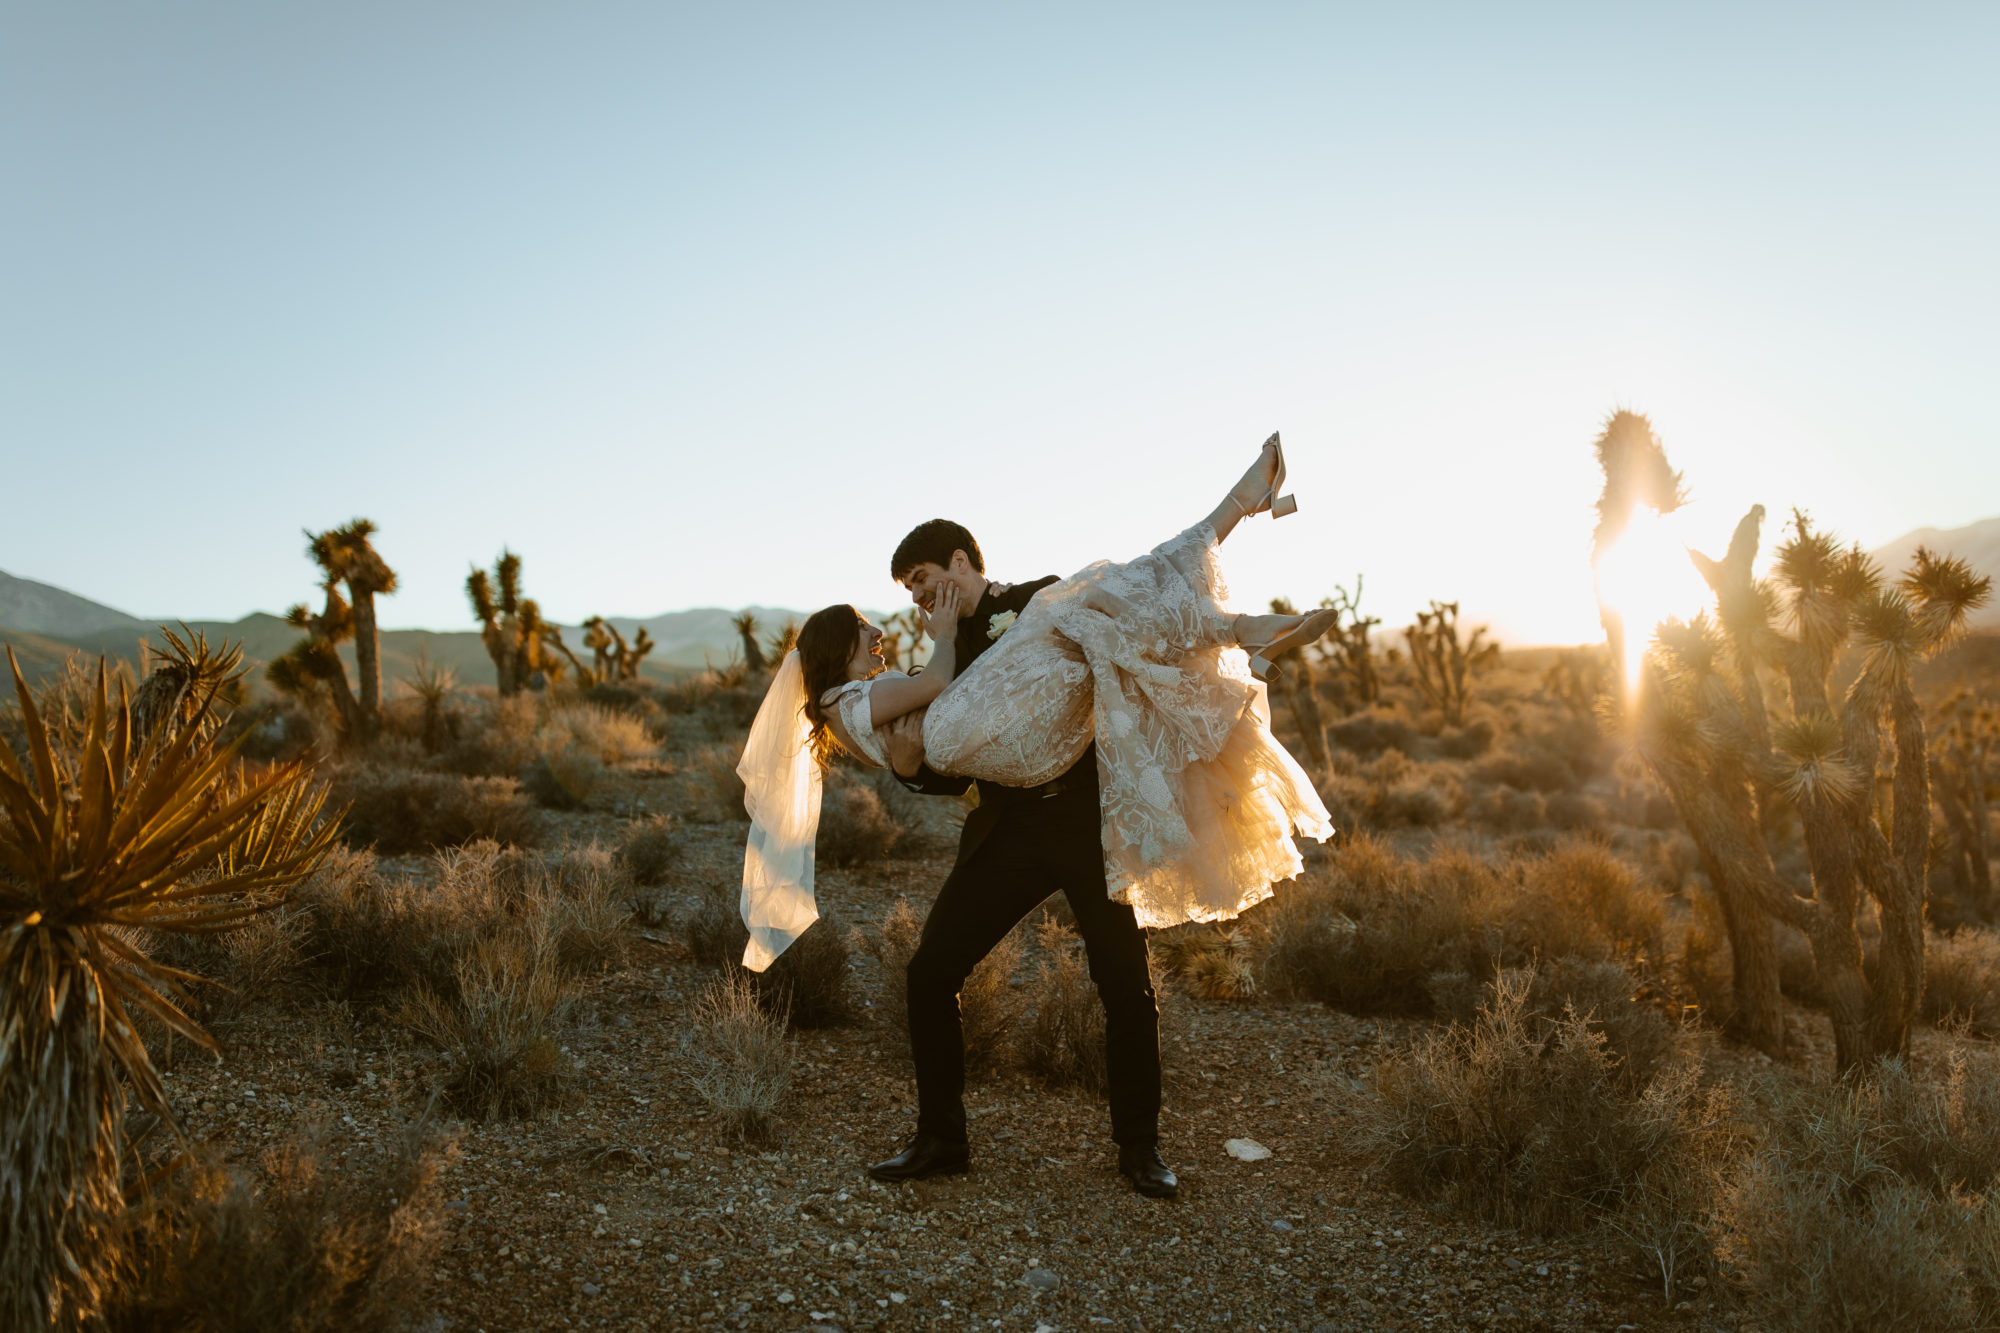 Bride and groom portraits in the Mojave desert in Nevada